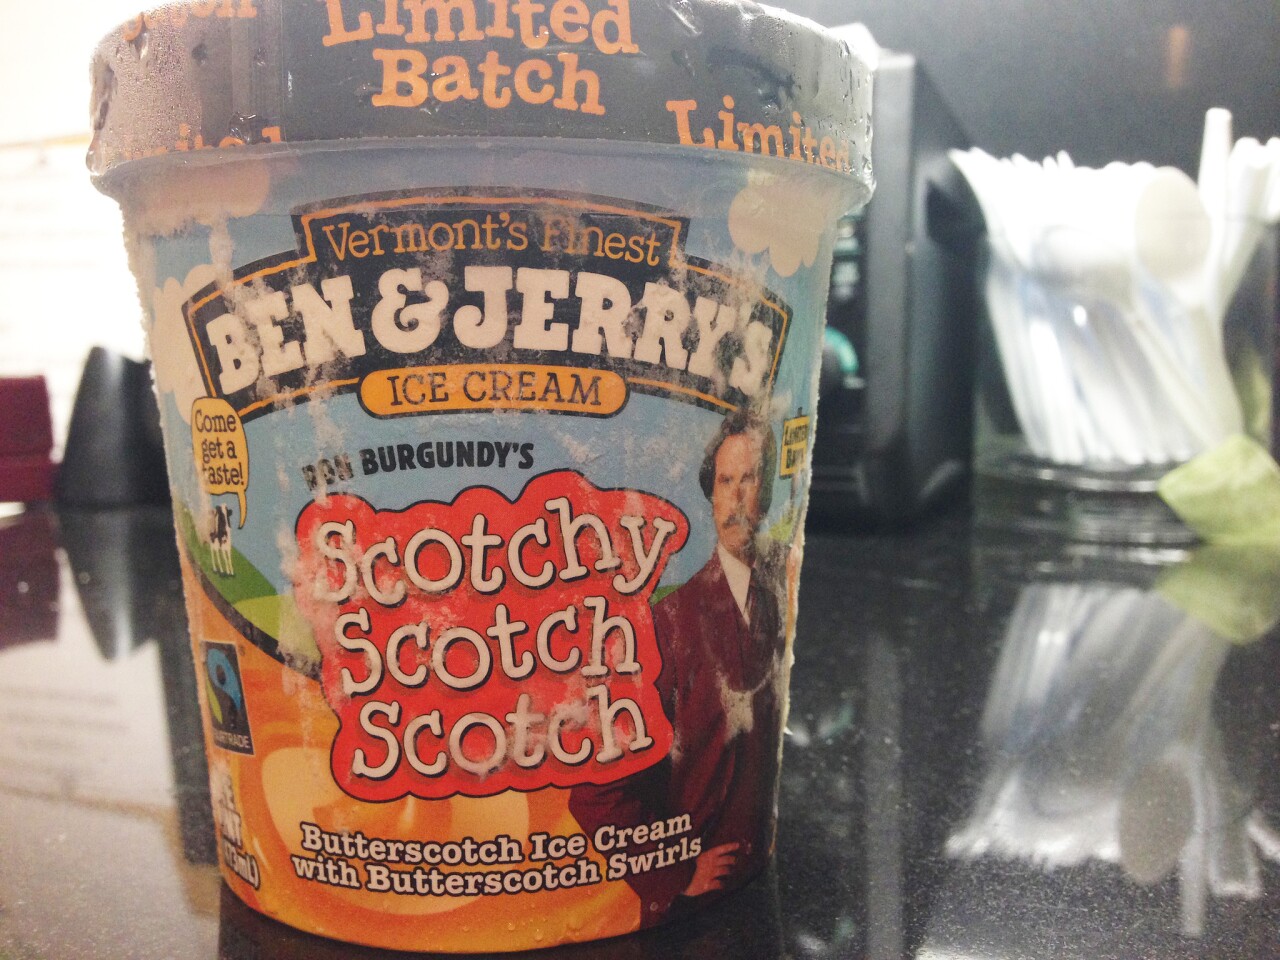 A container of the new Ben & Jerry's Ron Burgundy's Scotchy Scotch Scotch.